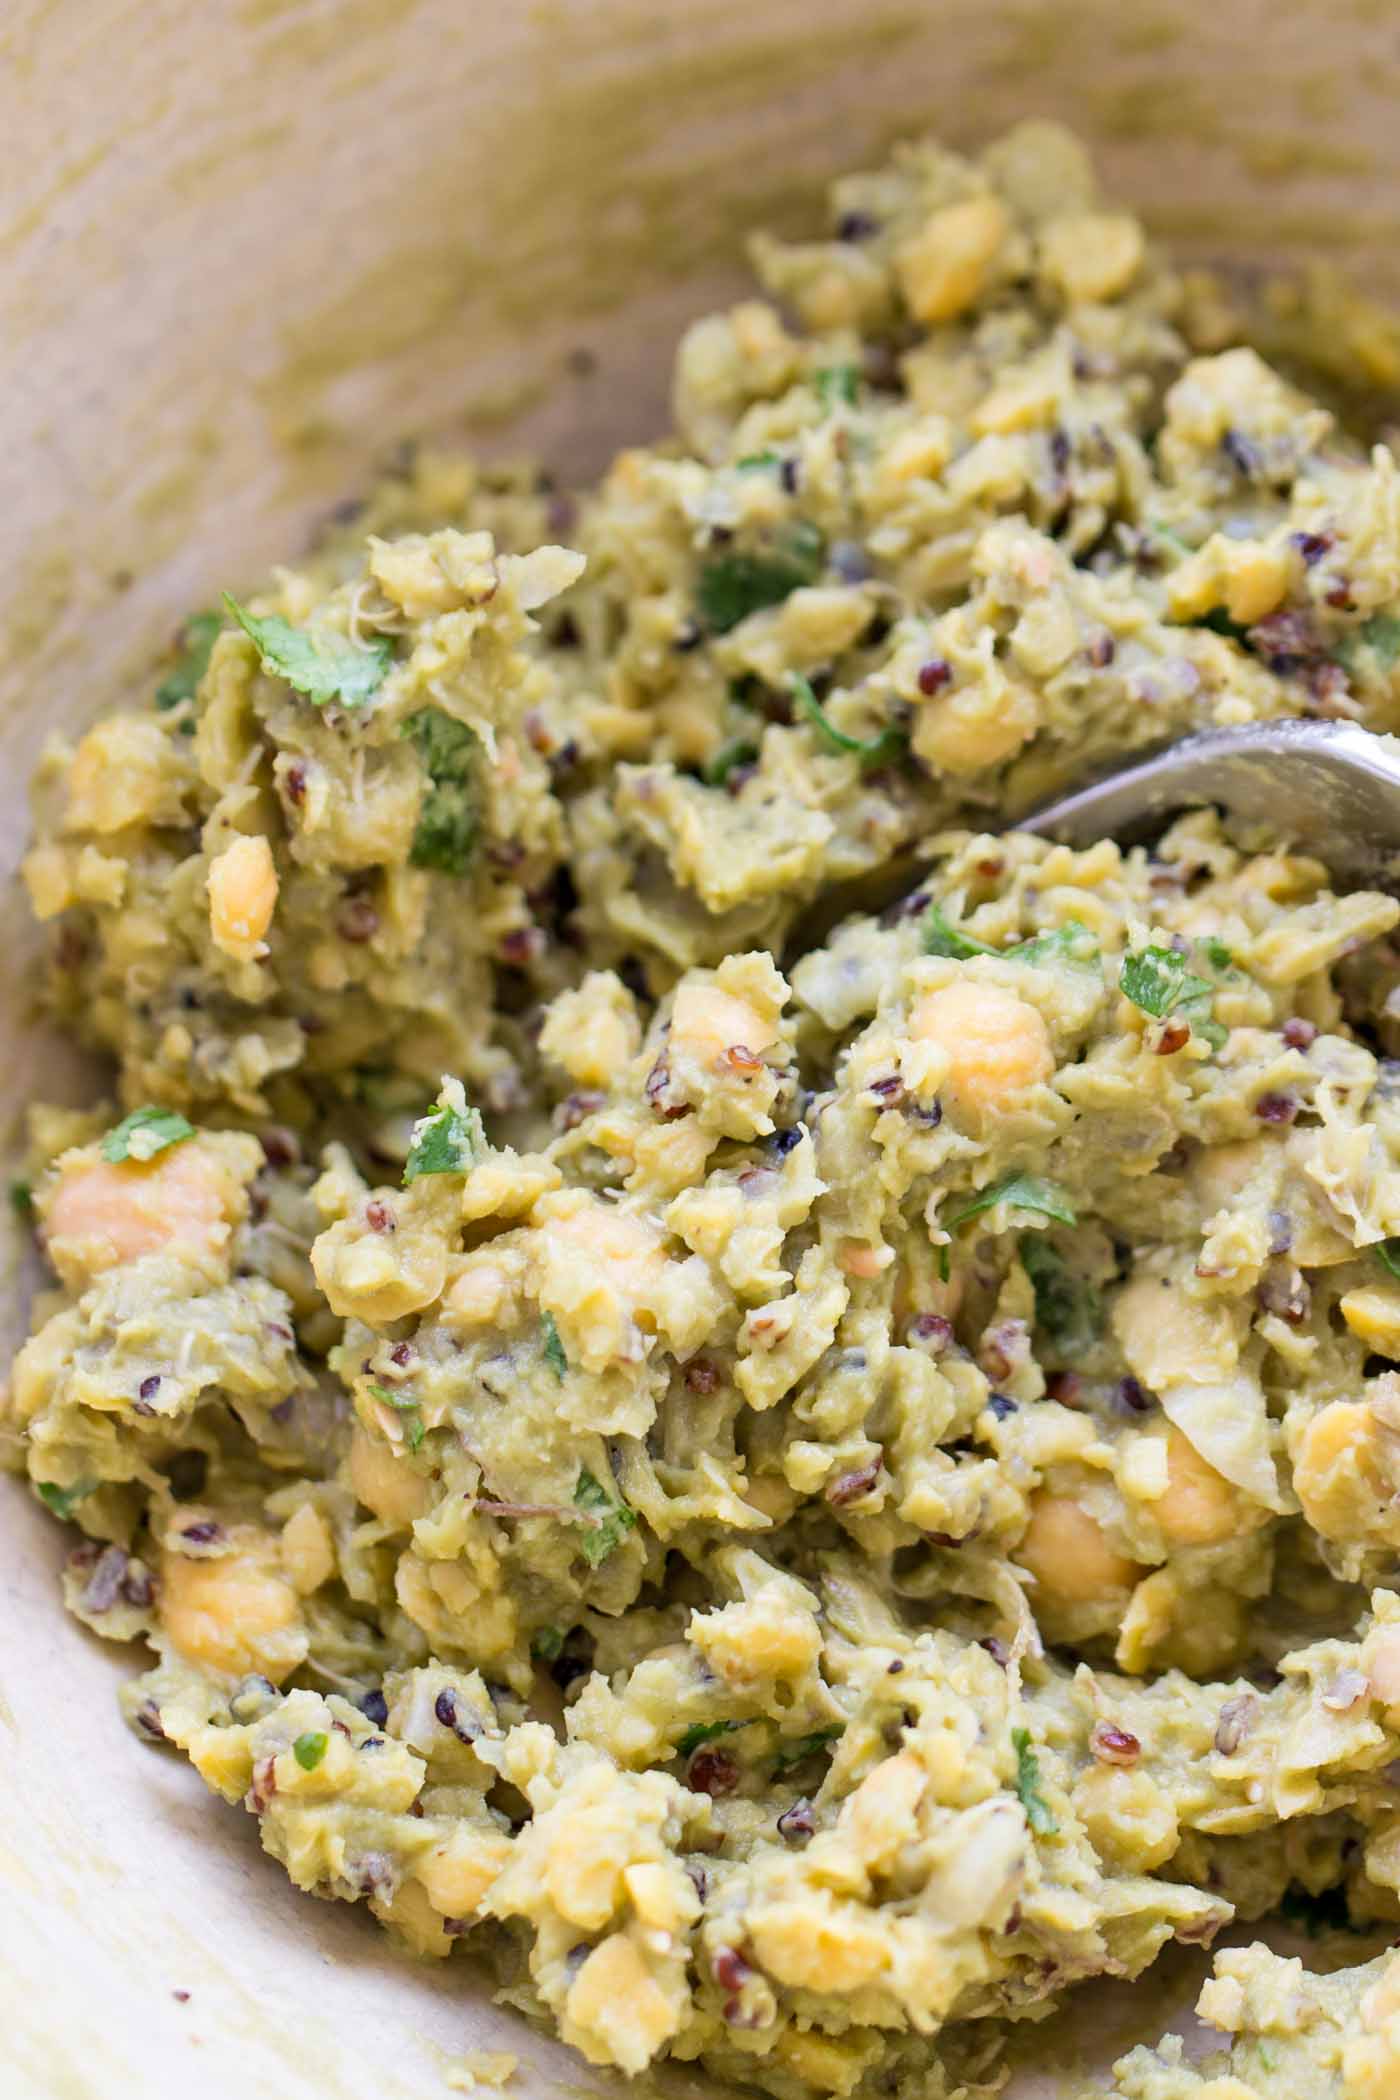 The most epic smashed chickpea salad EVER! With avocado and quinoa it's packed with protein, fiber AND healthy fats!